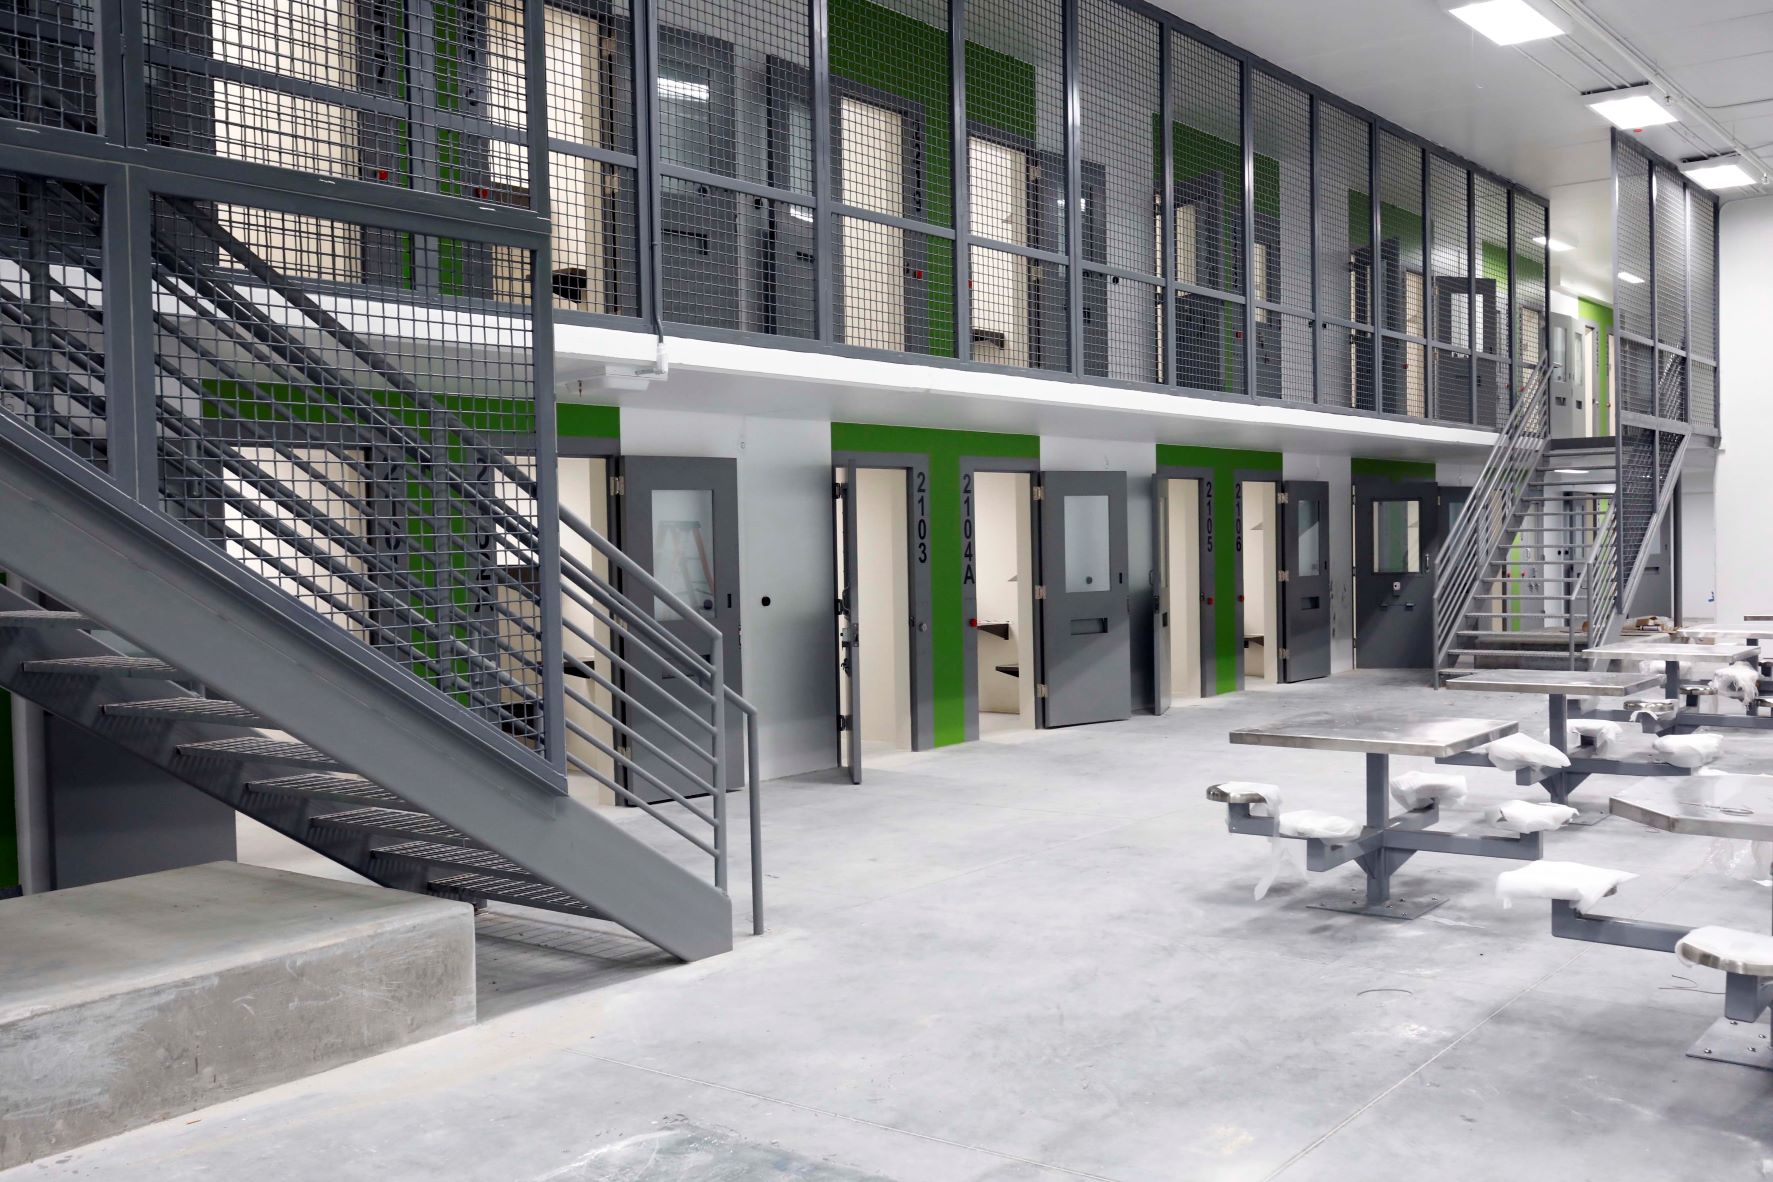 Pokin Around: Overcrowding and transit issues at brand new jail, former inmate says